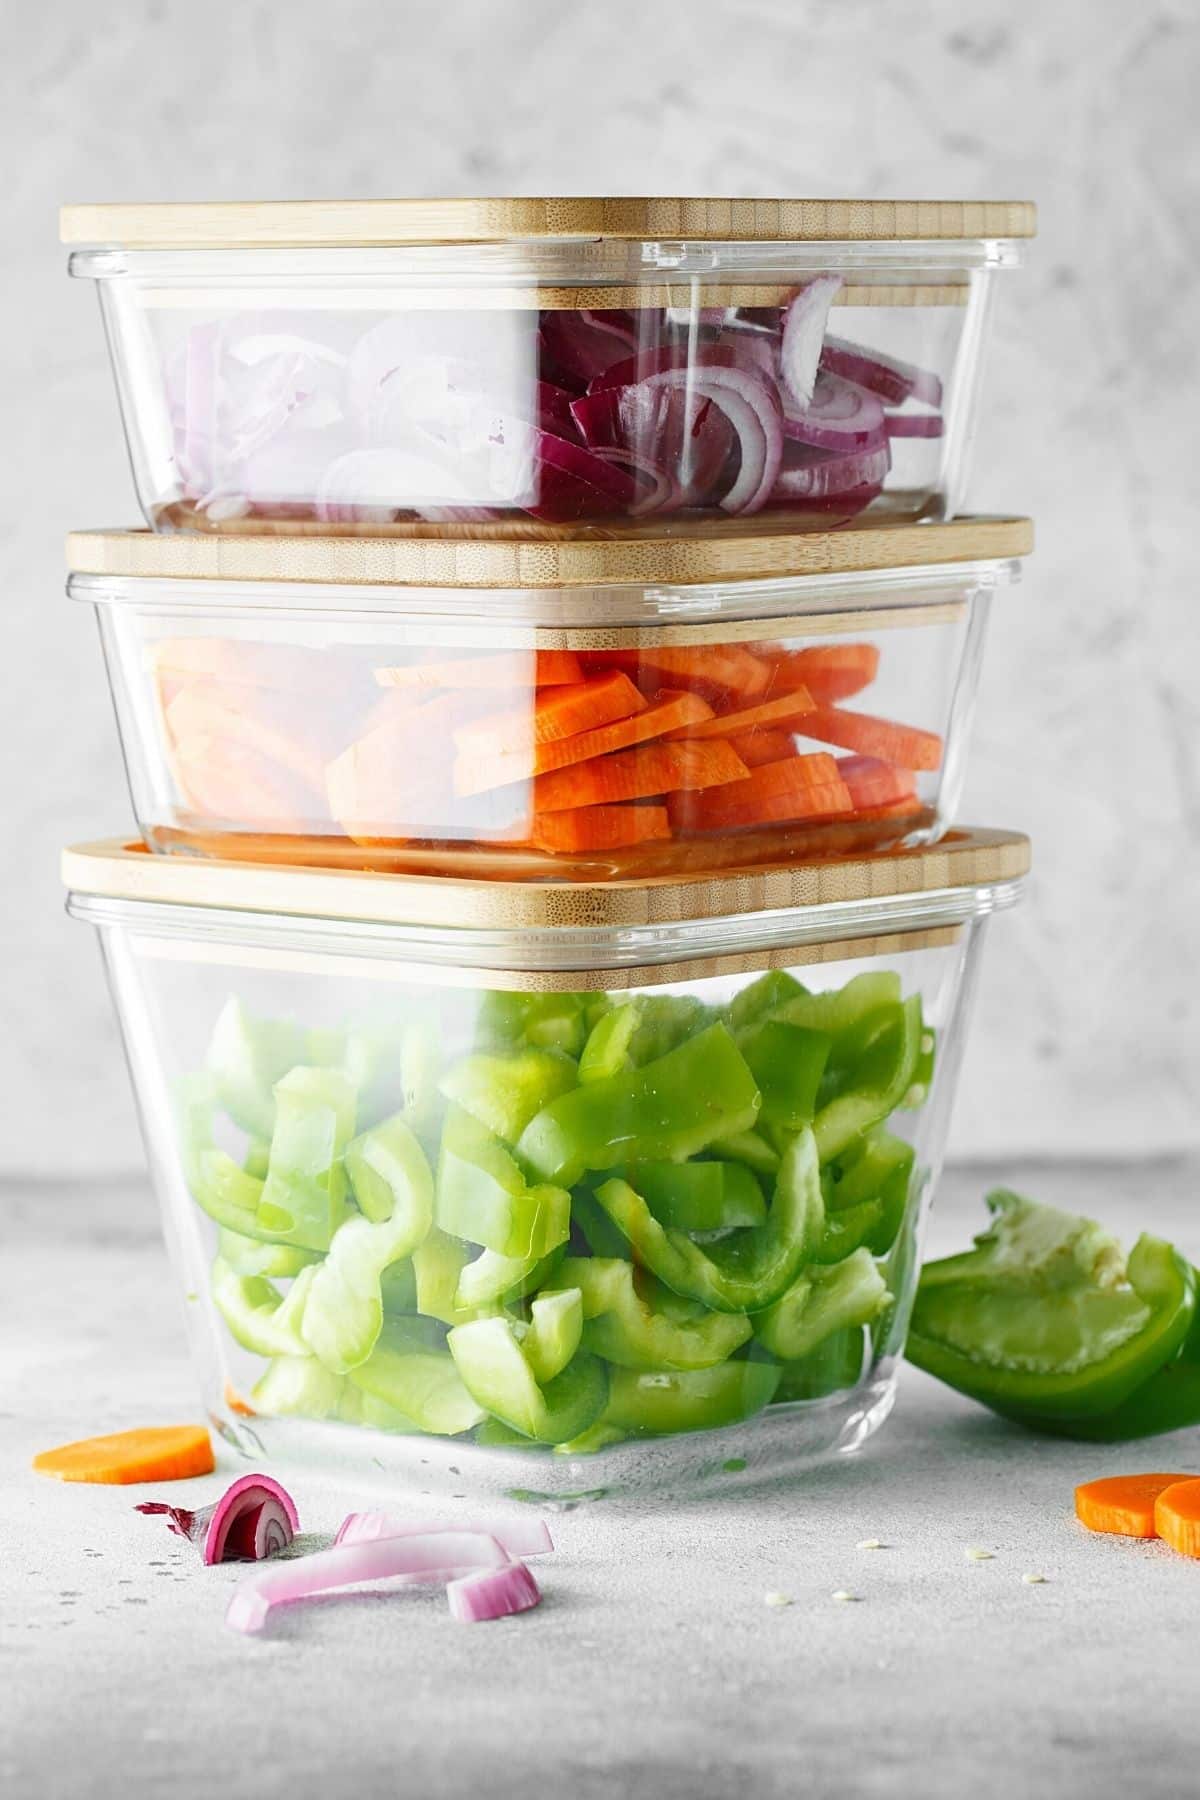 chopped vegetables in square glass containers.